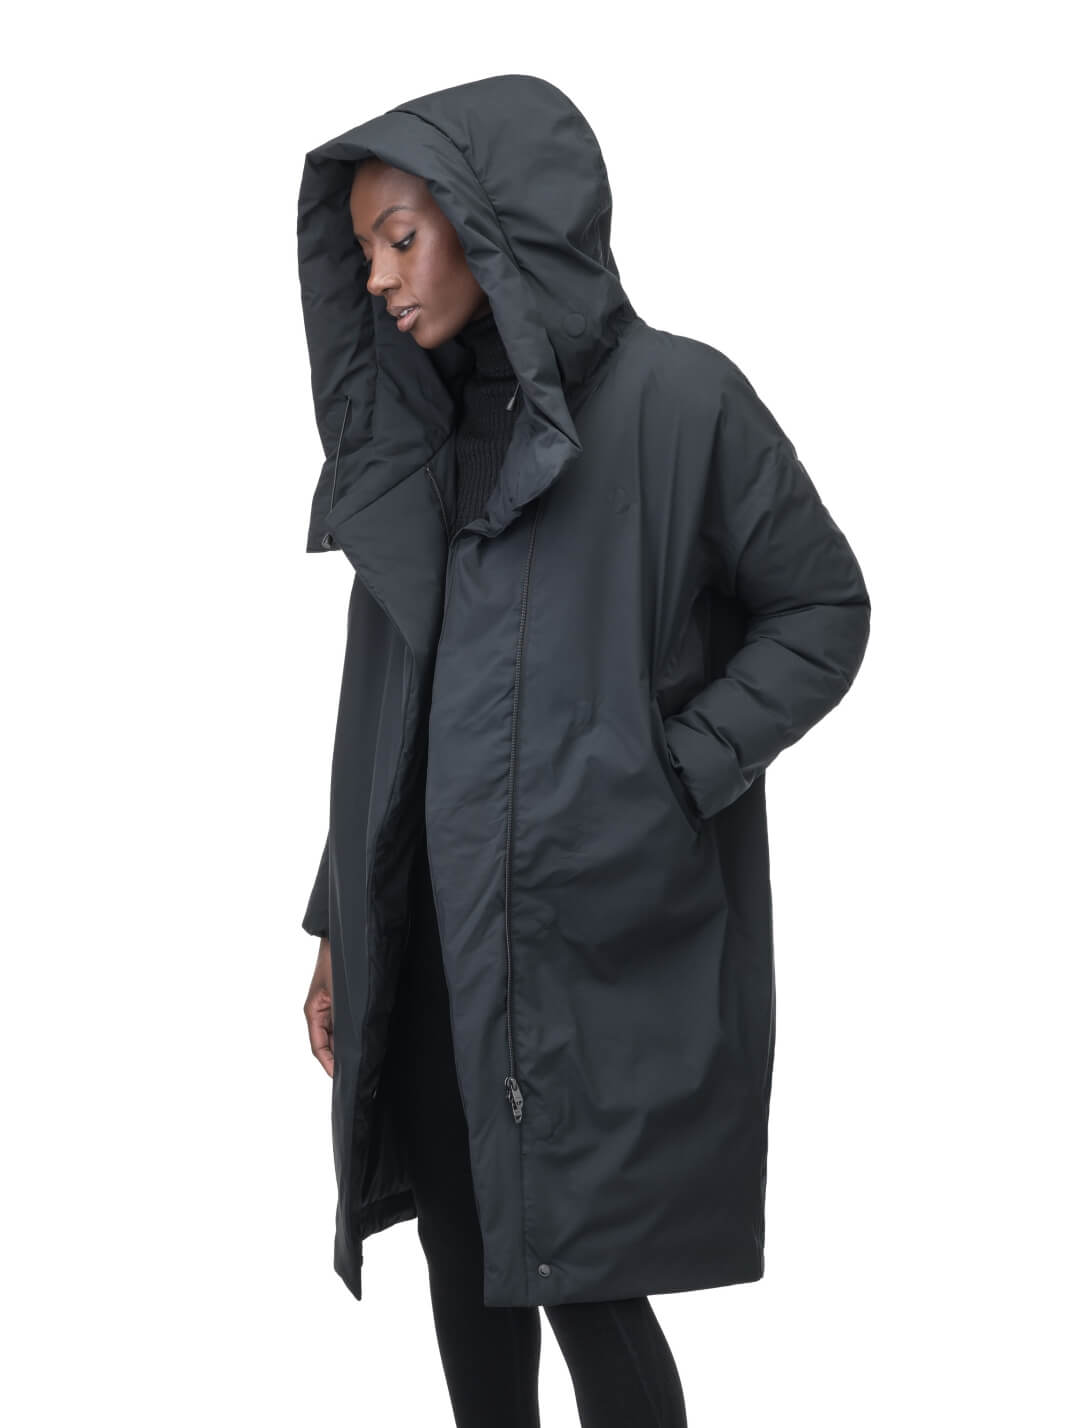 Axis Ladies Oversized Coat in knee length, Canadian duck down insulation, and two-way front zipper, in Black